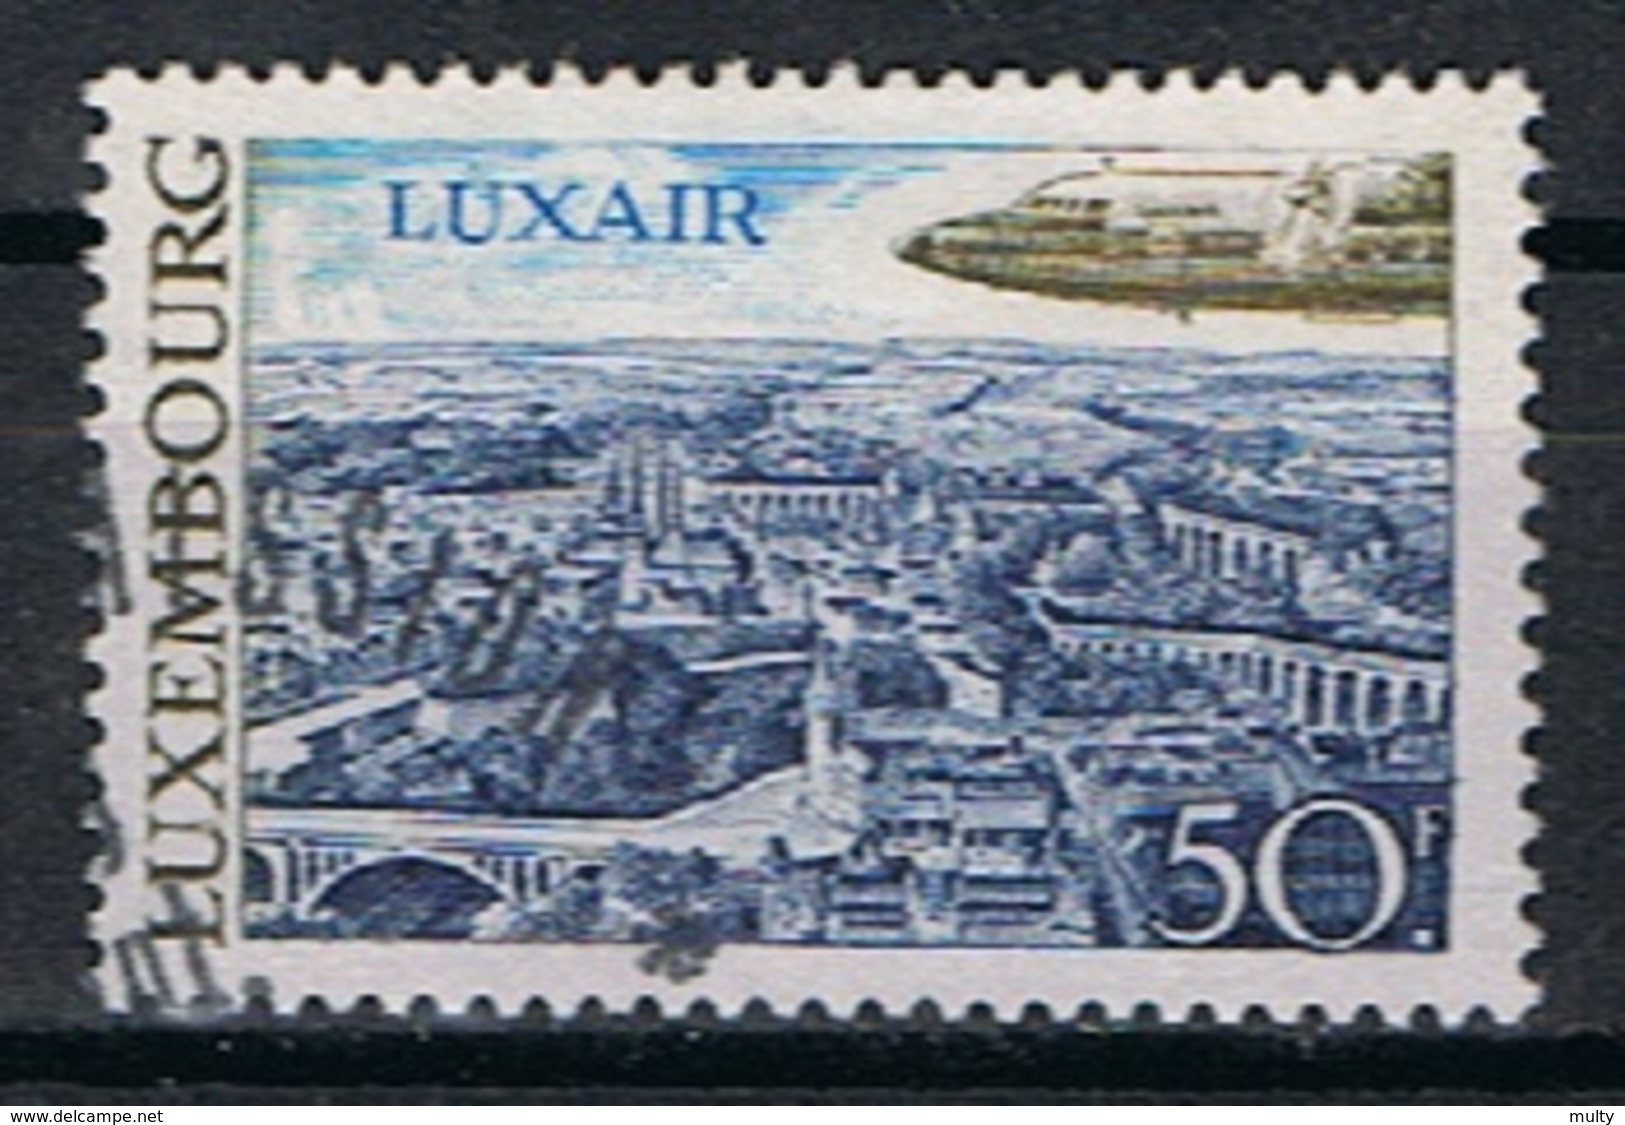 Luxemburg Y/T LP 21 (0) - Used Stamps